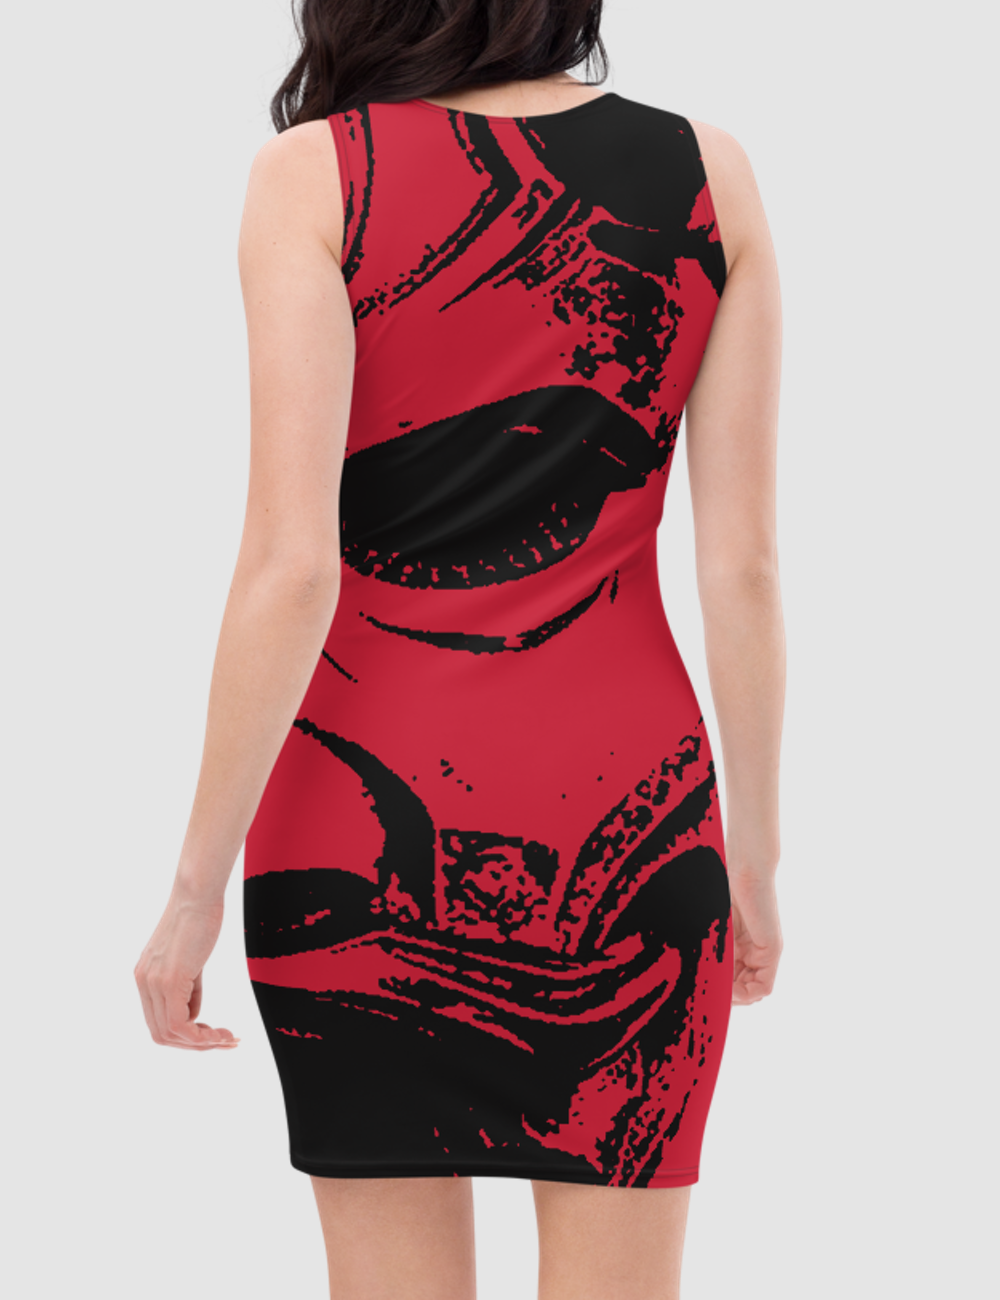 Fearsome Red Oni | Women's Sleeveless Fitted Sublimated Dress OniTakai